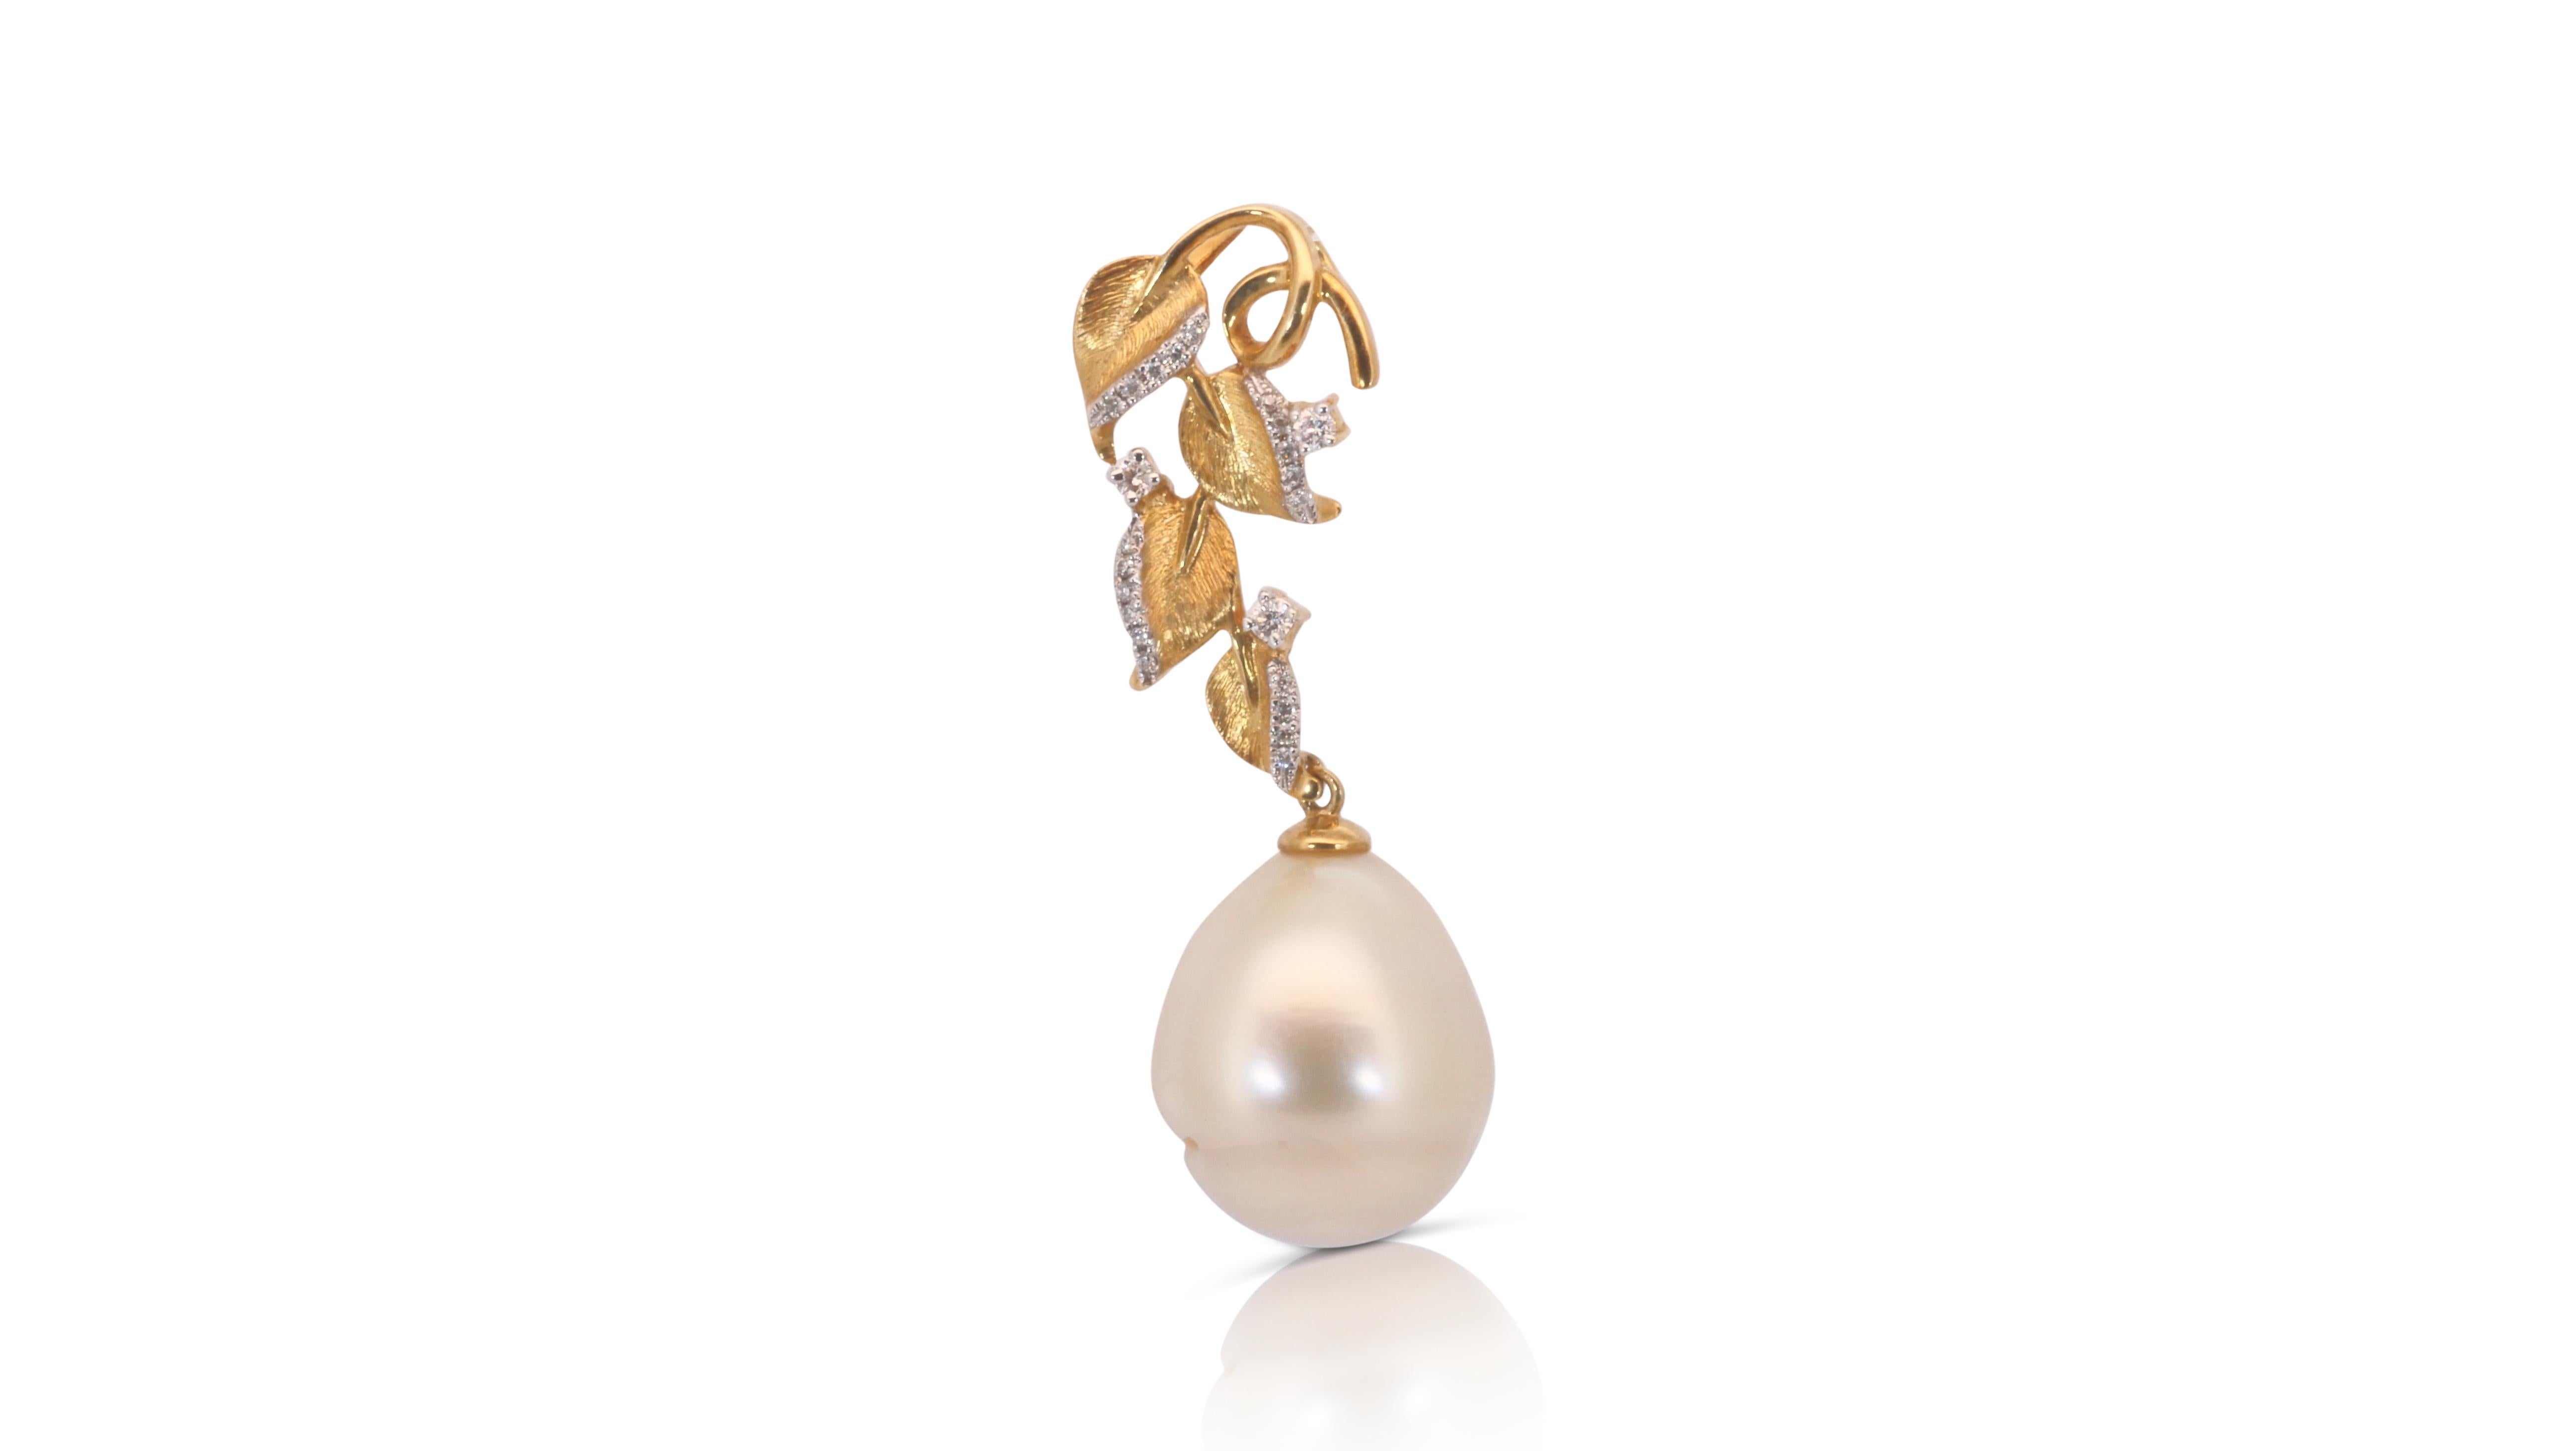 Oval Cut Splendid 18k Yellow Gold Pendant w/0.1 Carat Pearl & Diamonds-Chain not included For Sale